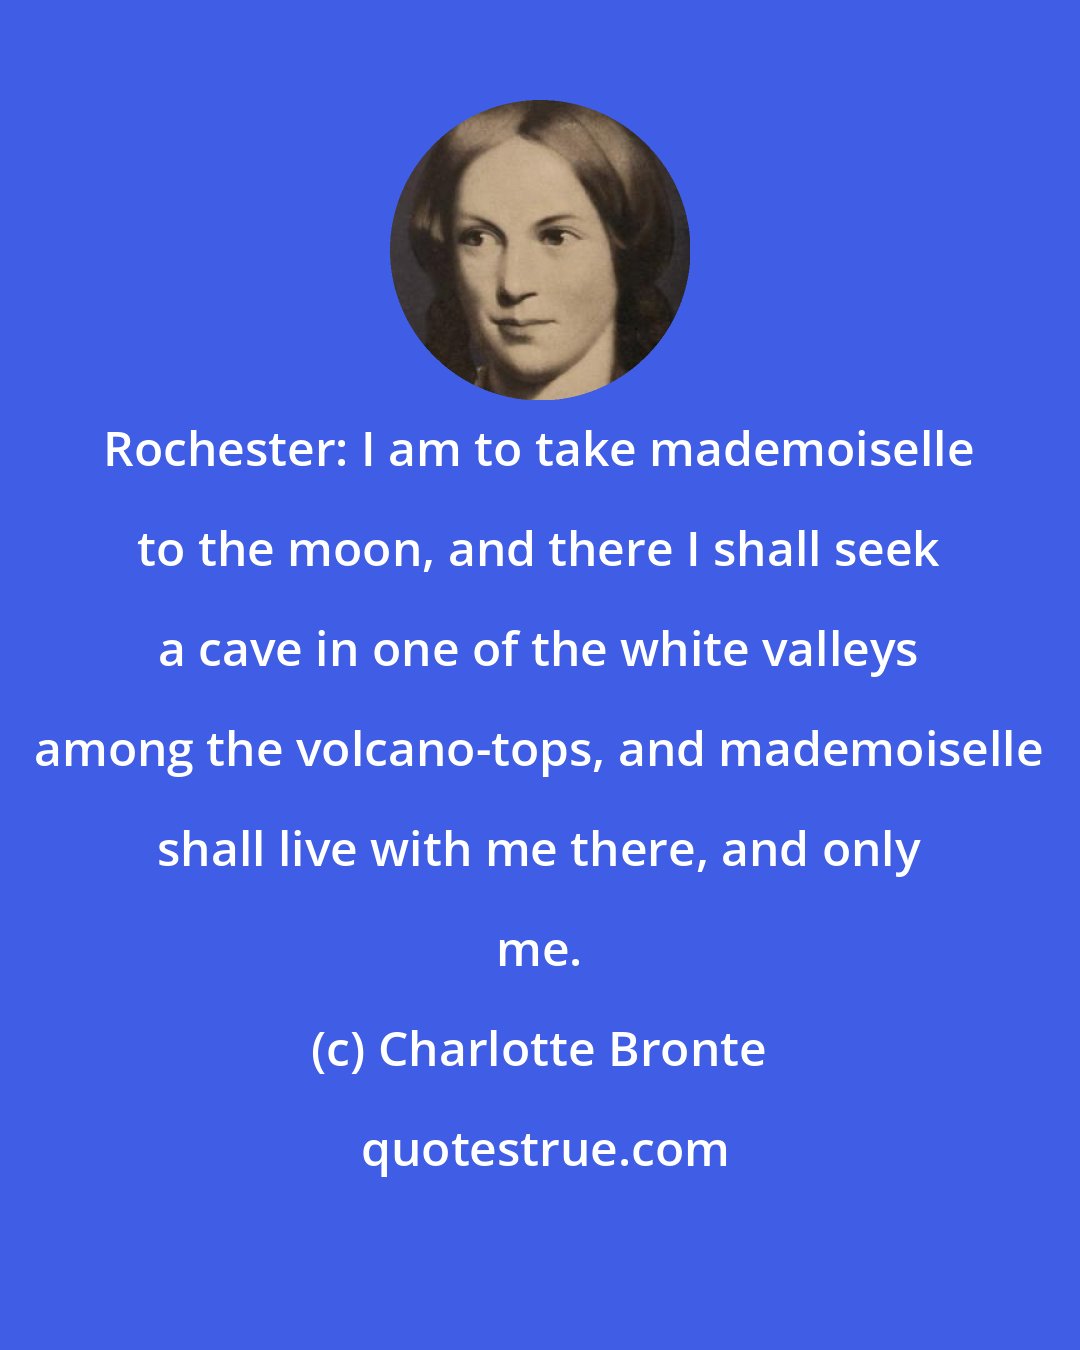 Charlotte Bronte: Rochester: I am to take mademoiselle to the moon, and there I shall seek a cave in one of the white valleys among the volcano-tops, and mademoiselle shall live with me there, and only me.